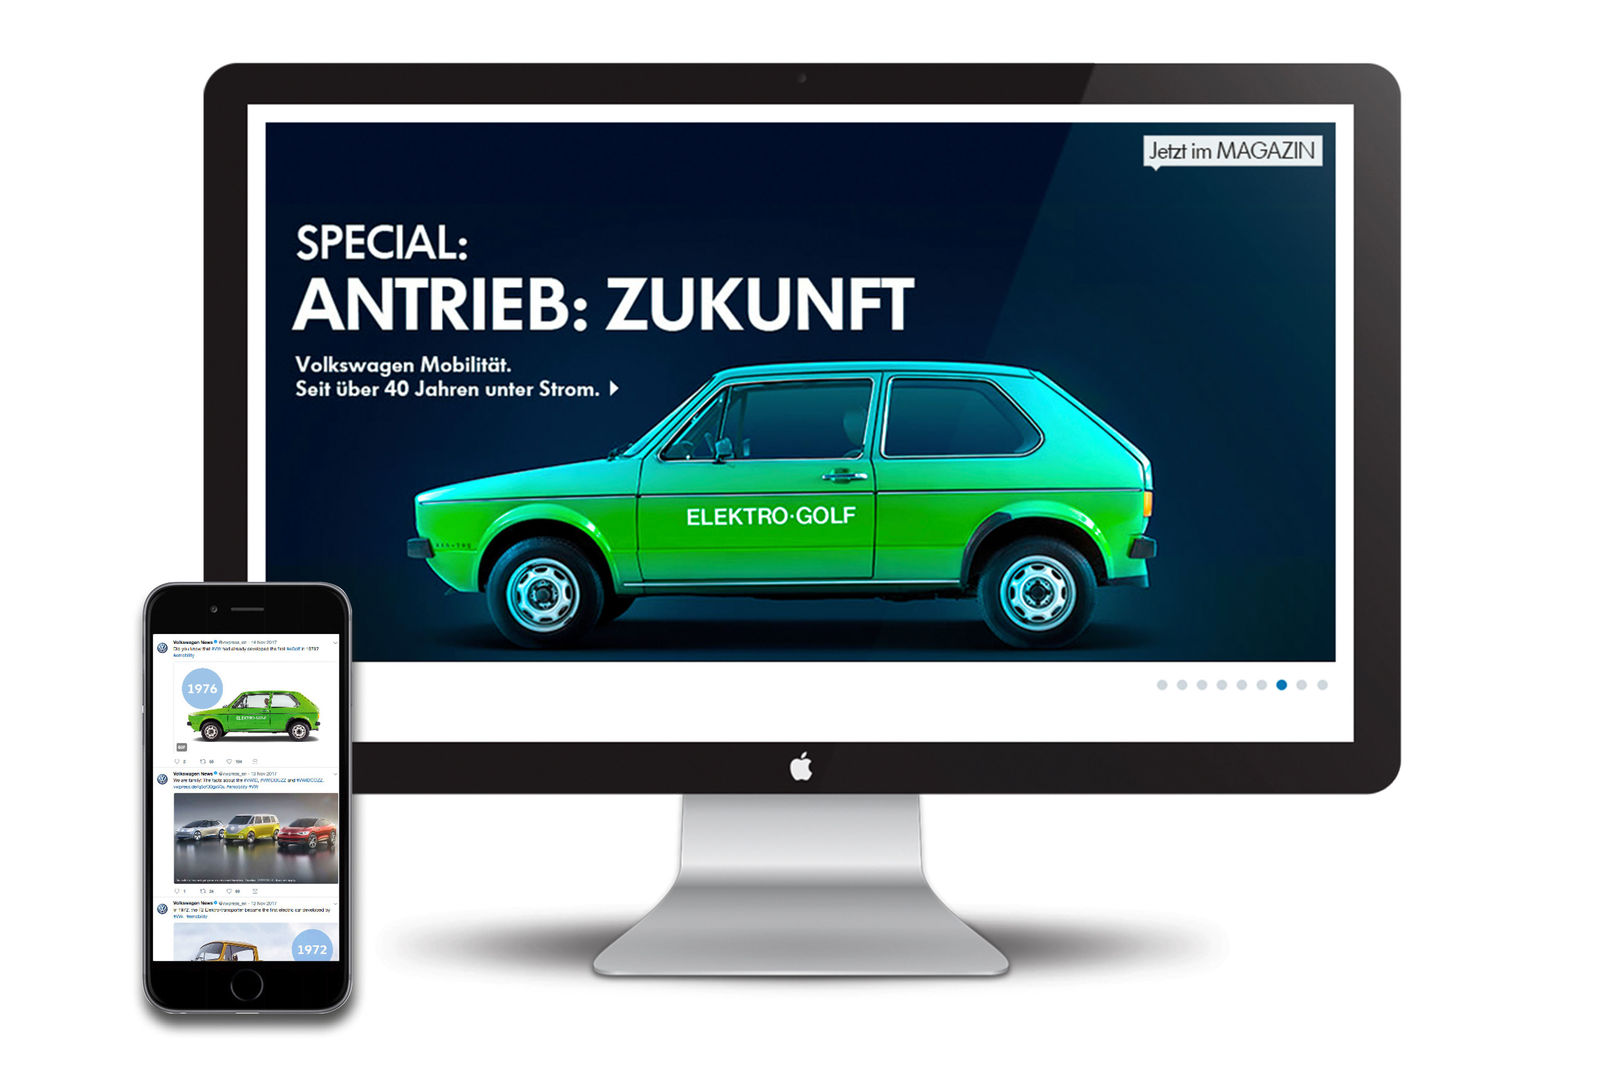 Successful campaign on the history of electromobility at Volkswagen